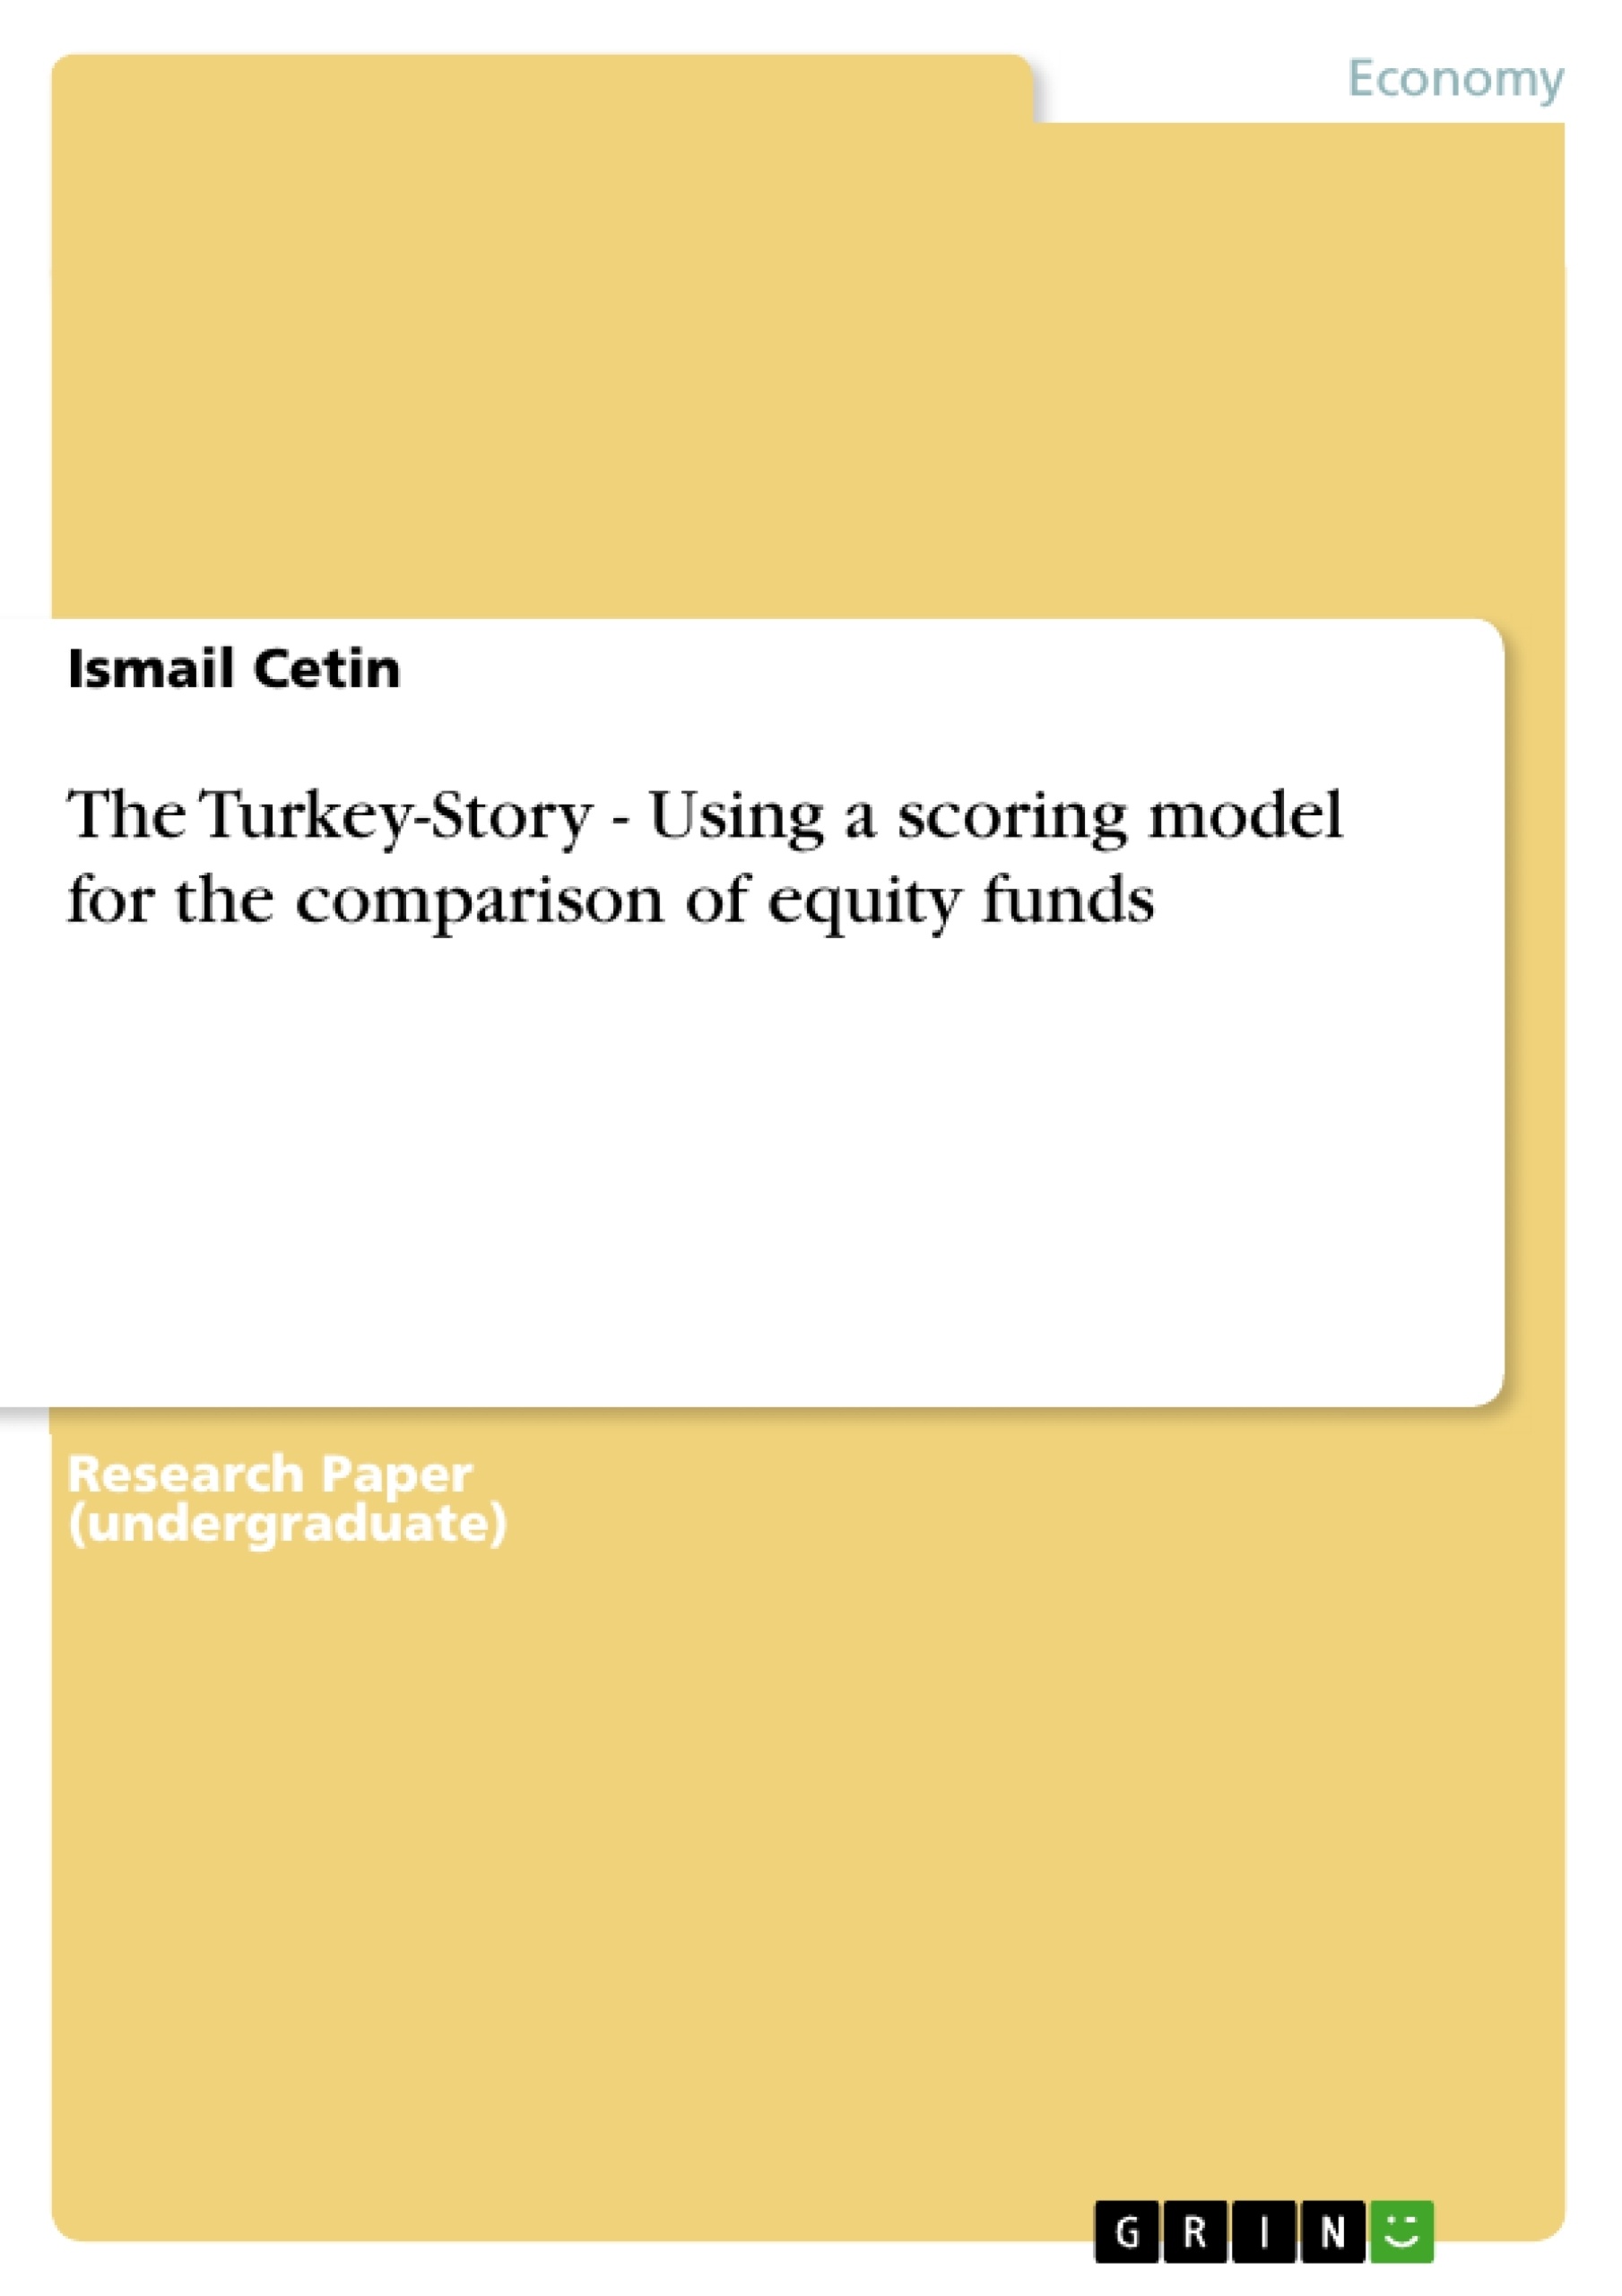 Título: The Turkey-Story - Using a scoring model for the comparison of equity funds